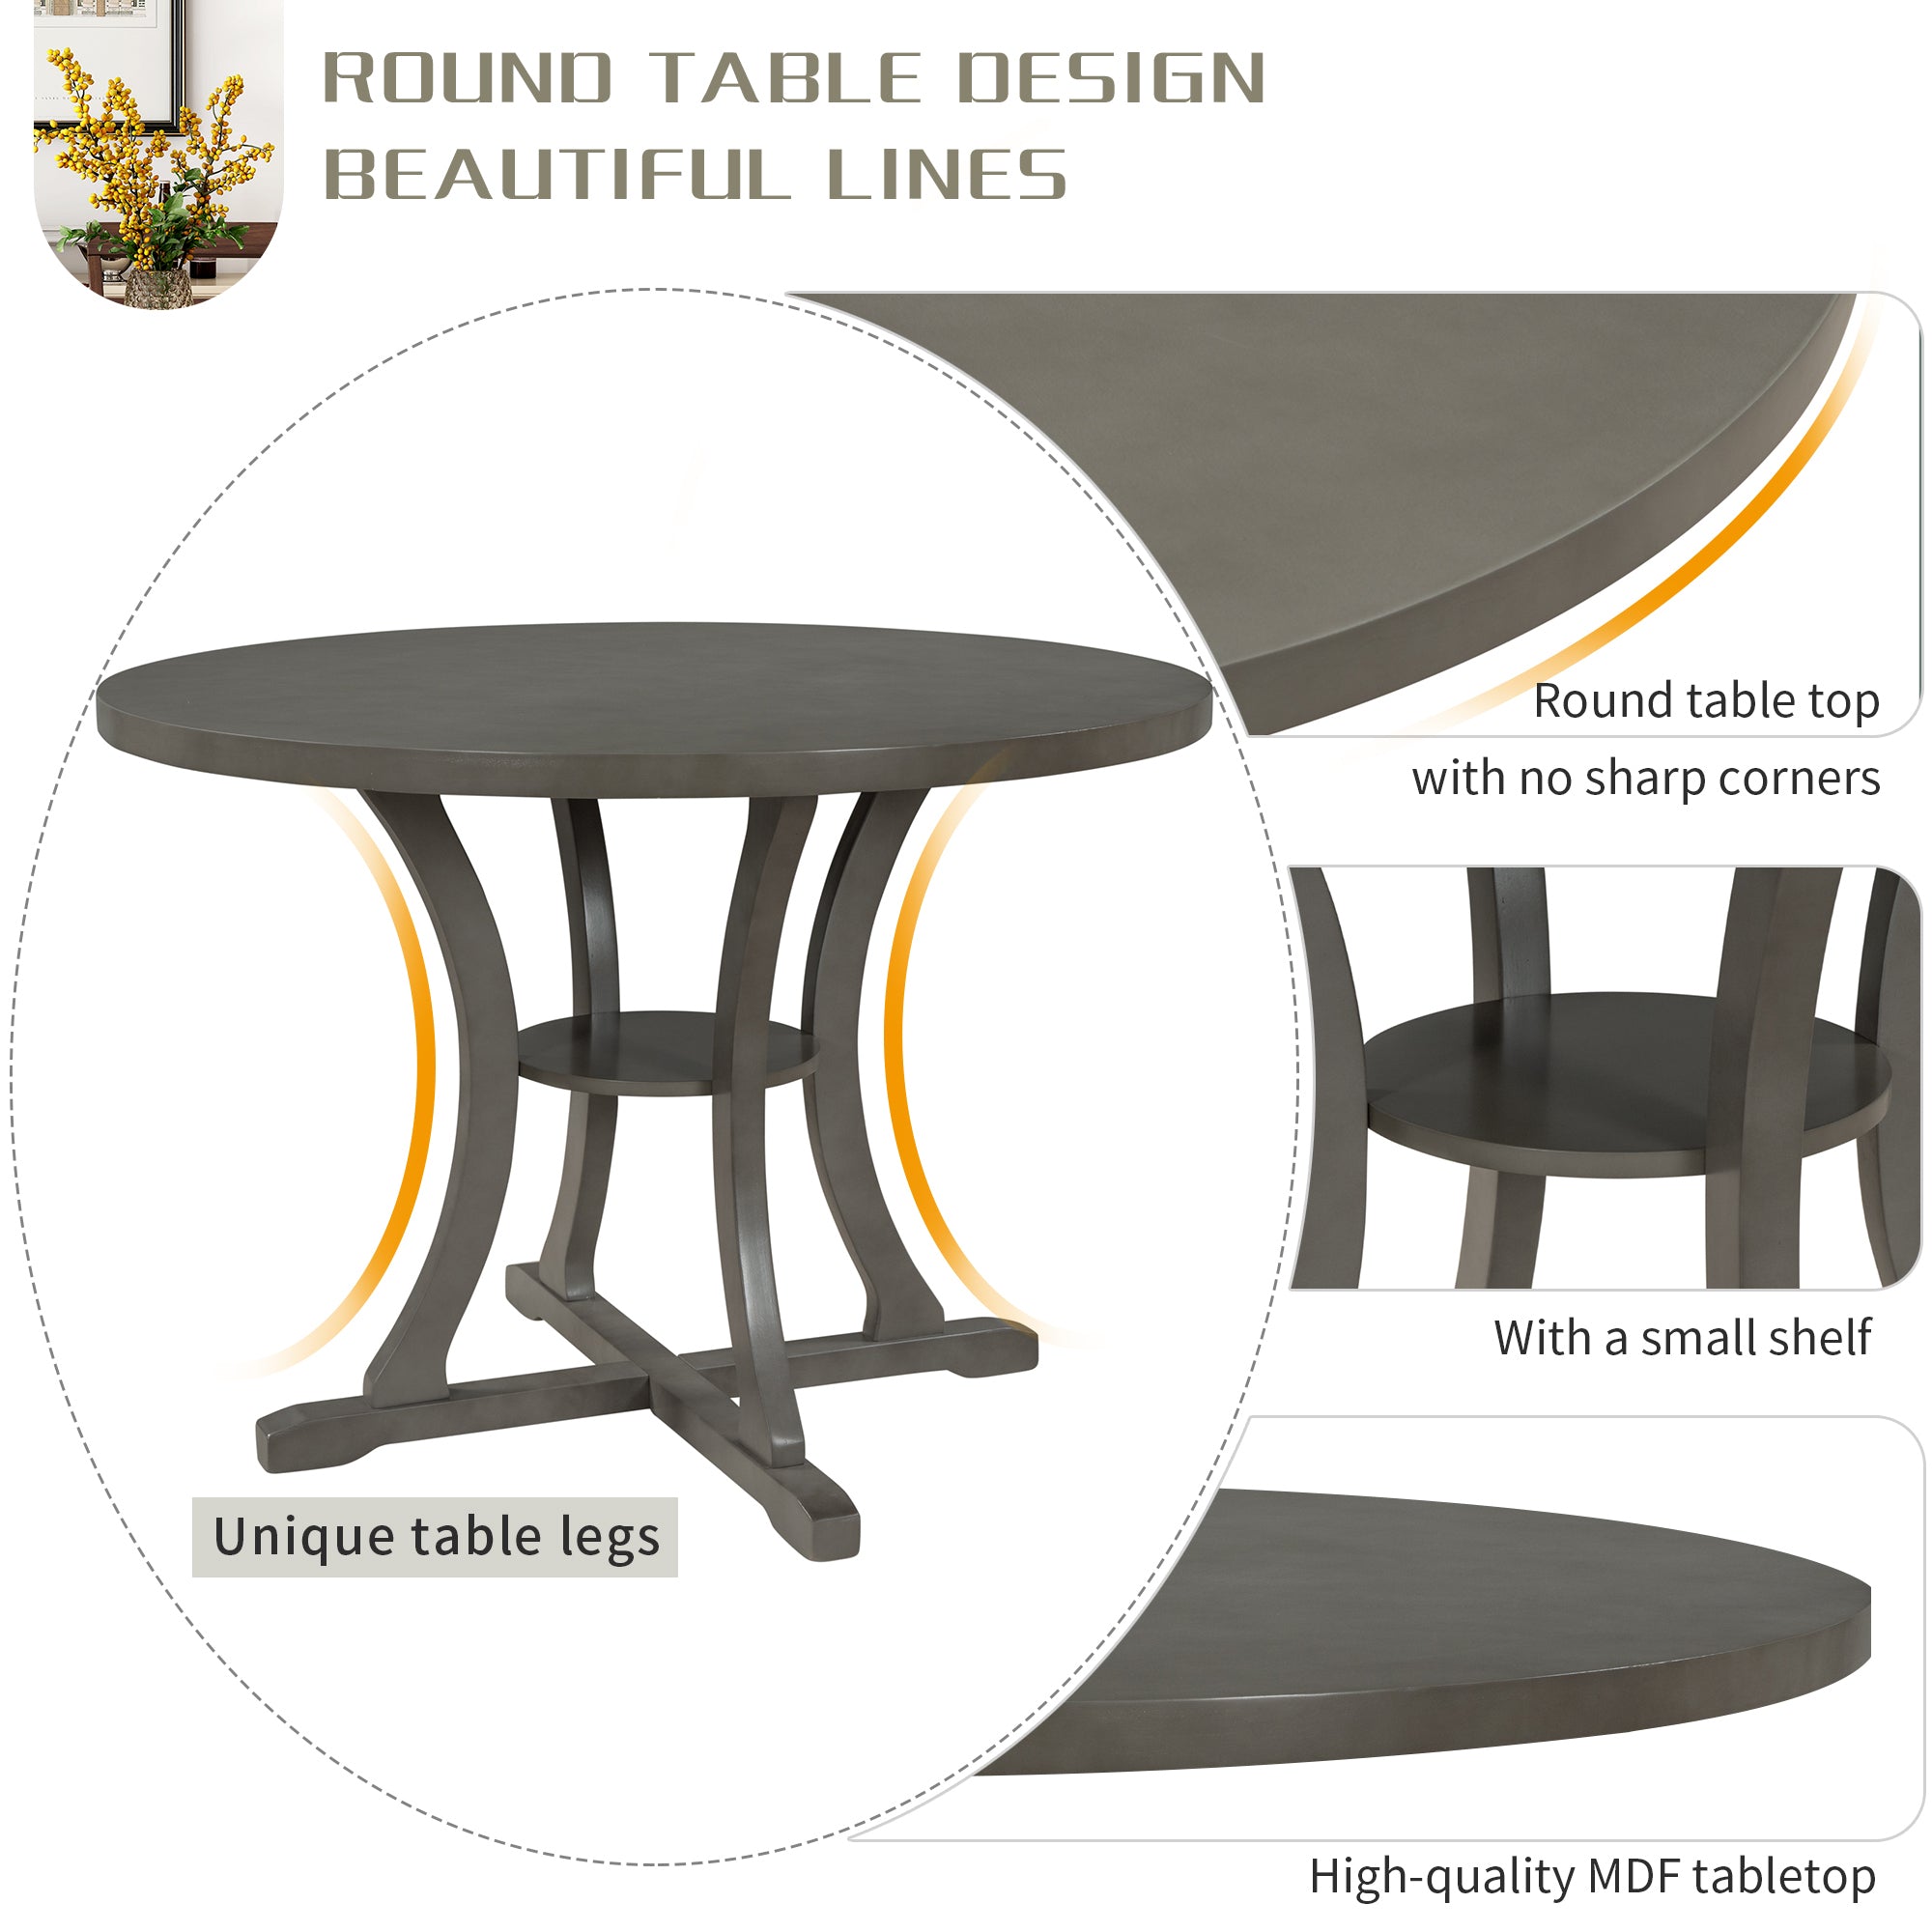 TREXM 5-Piece Round Dining Table and Chair Set with Special-shaped Legs and an Exquisitely Designed Hollow Chair Back for Dining Room (Gray)